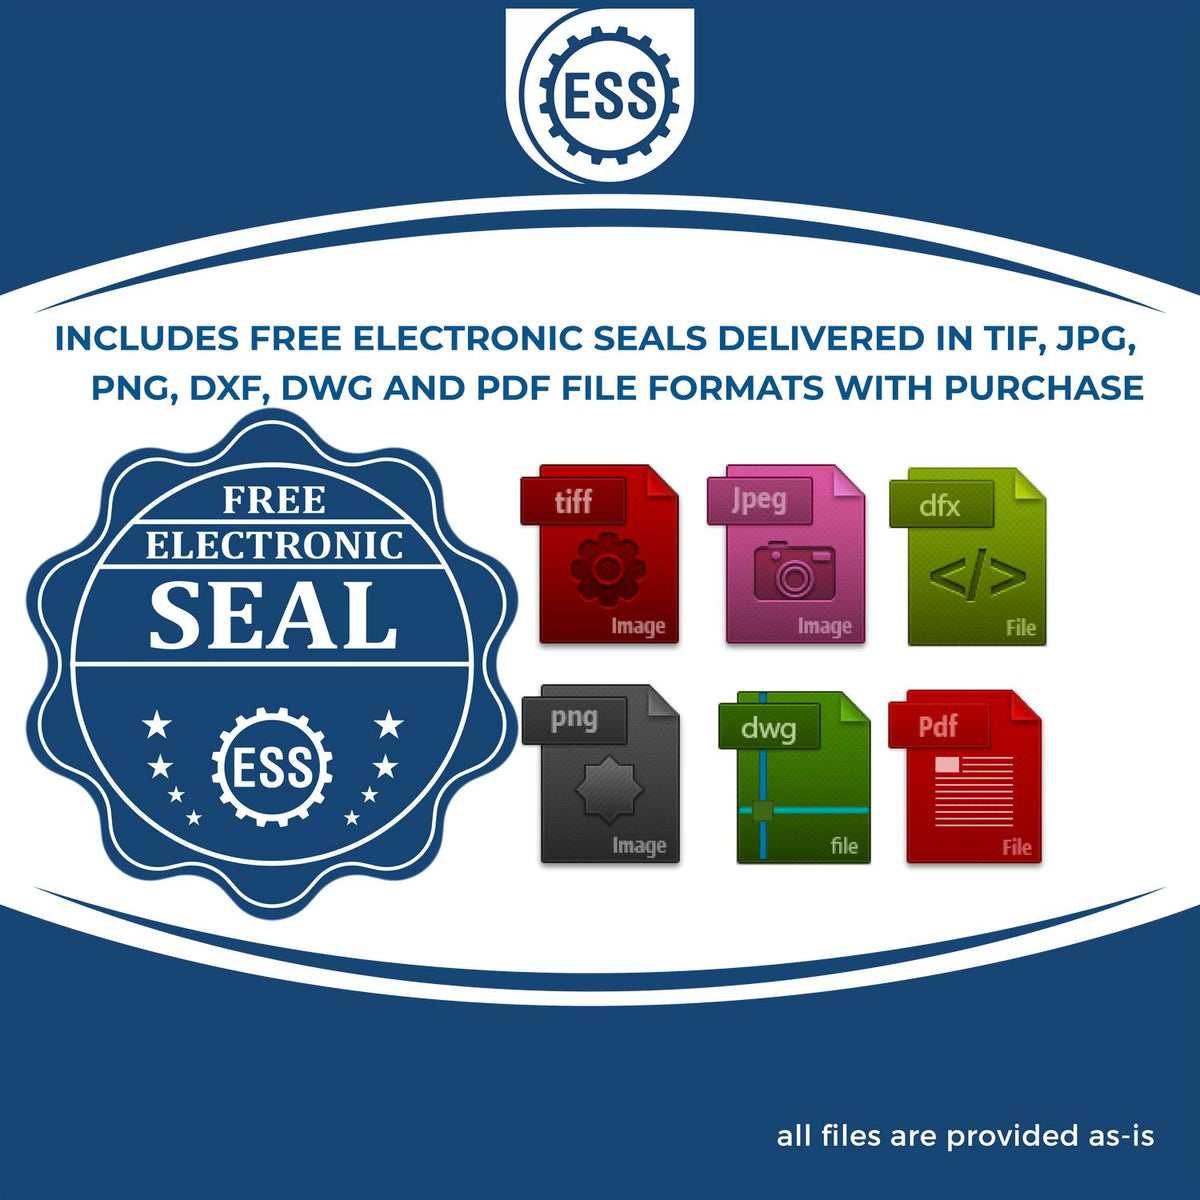 An infographic for the free electronic seal for the Slim Pre-Inked Oklahoma Landscape Architect Seal Stamp illustrating the different file type icons such as DXF, DWG, TIF, JPG and PNG.